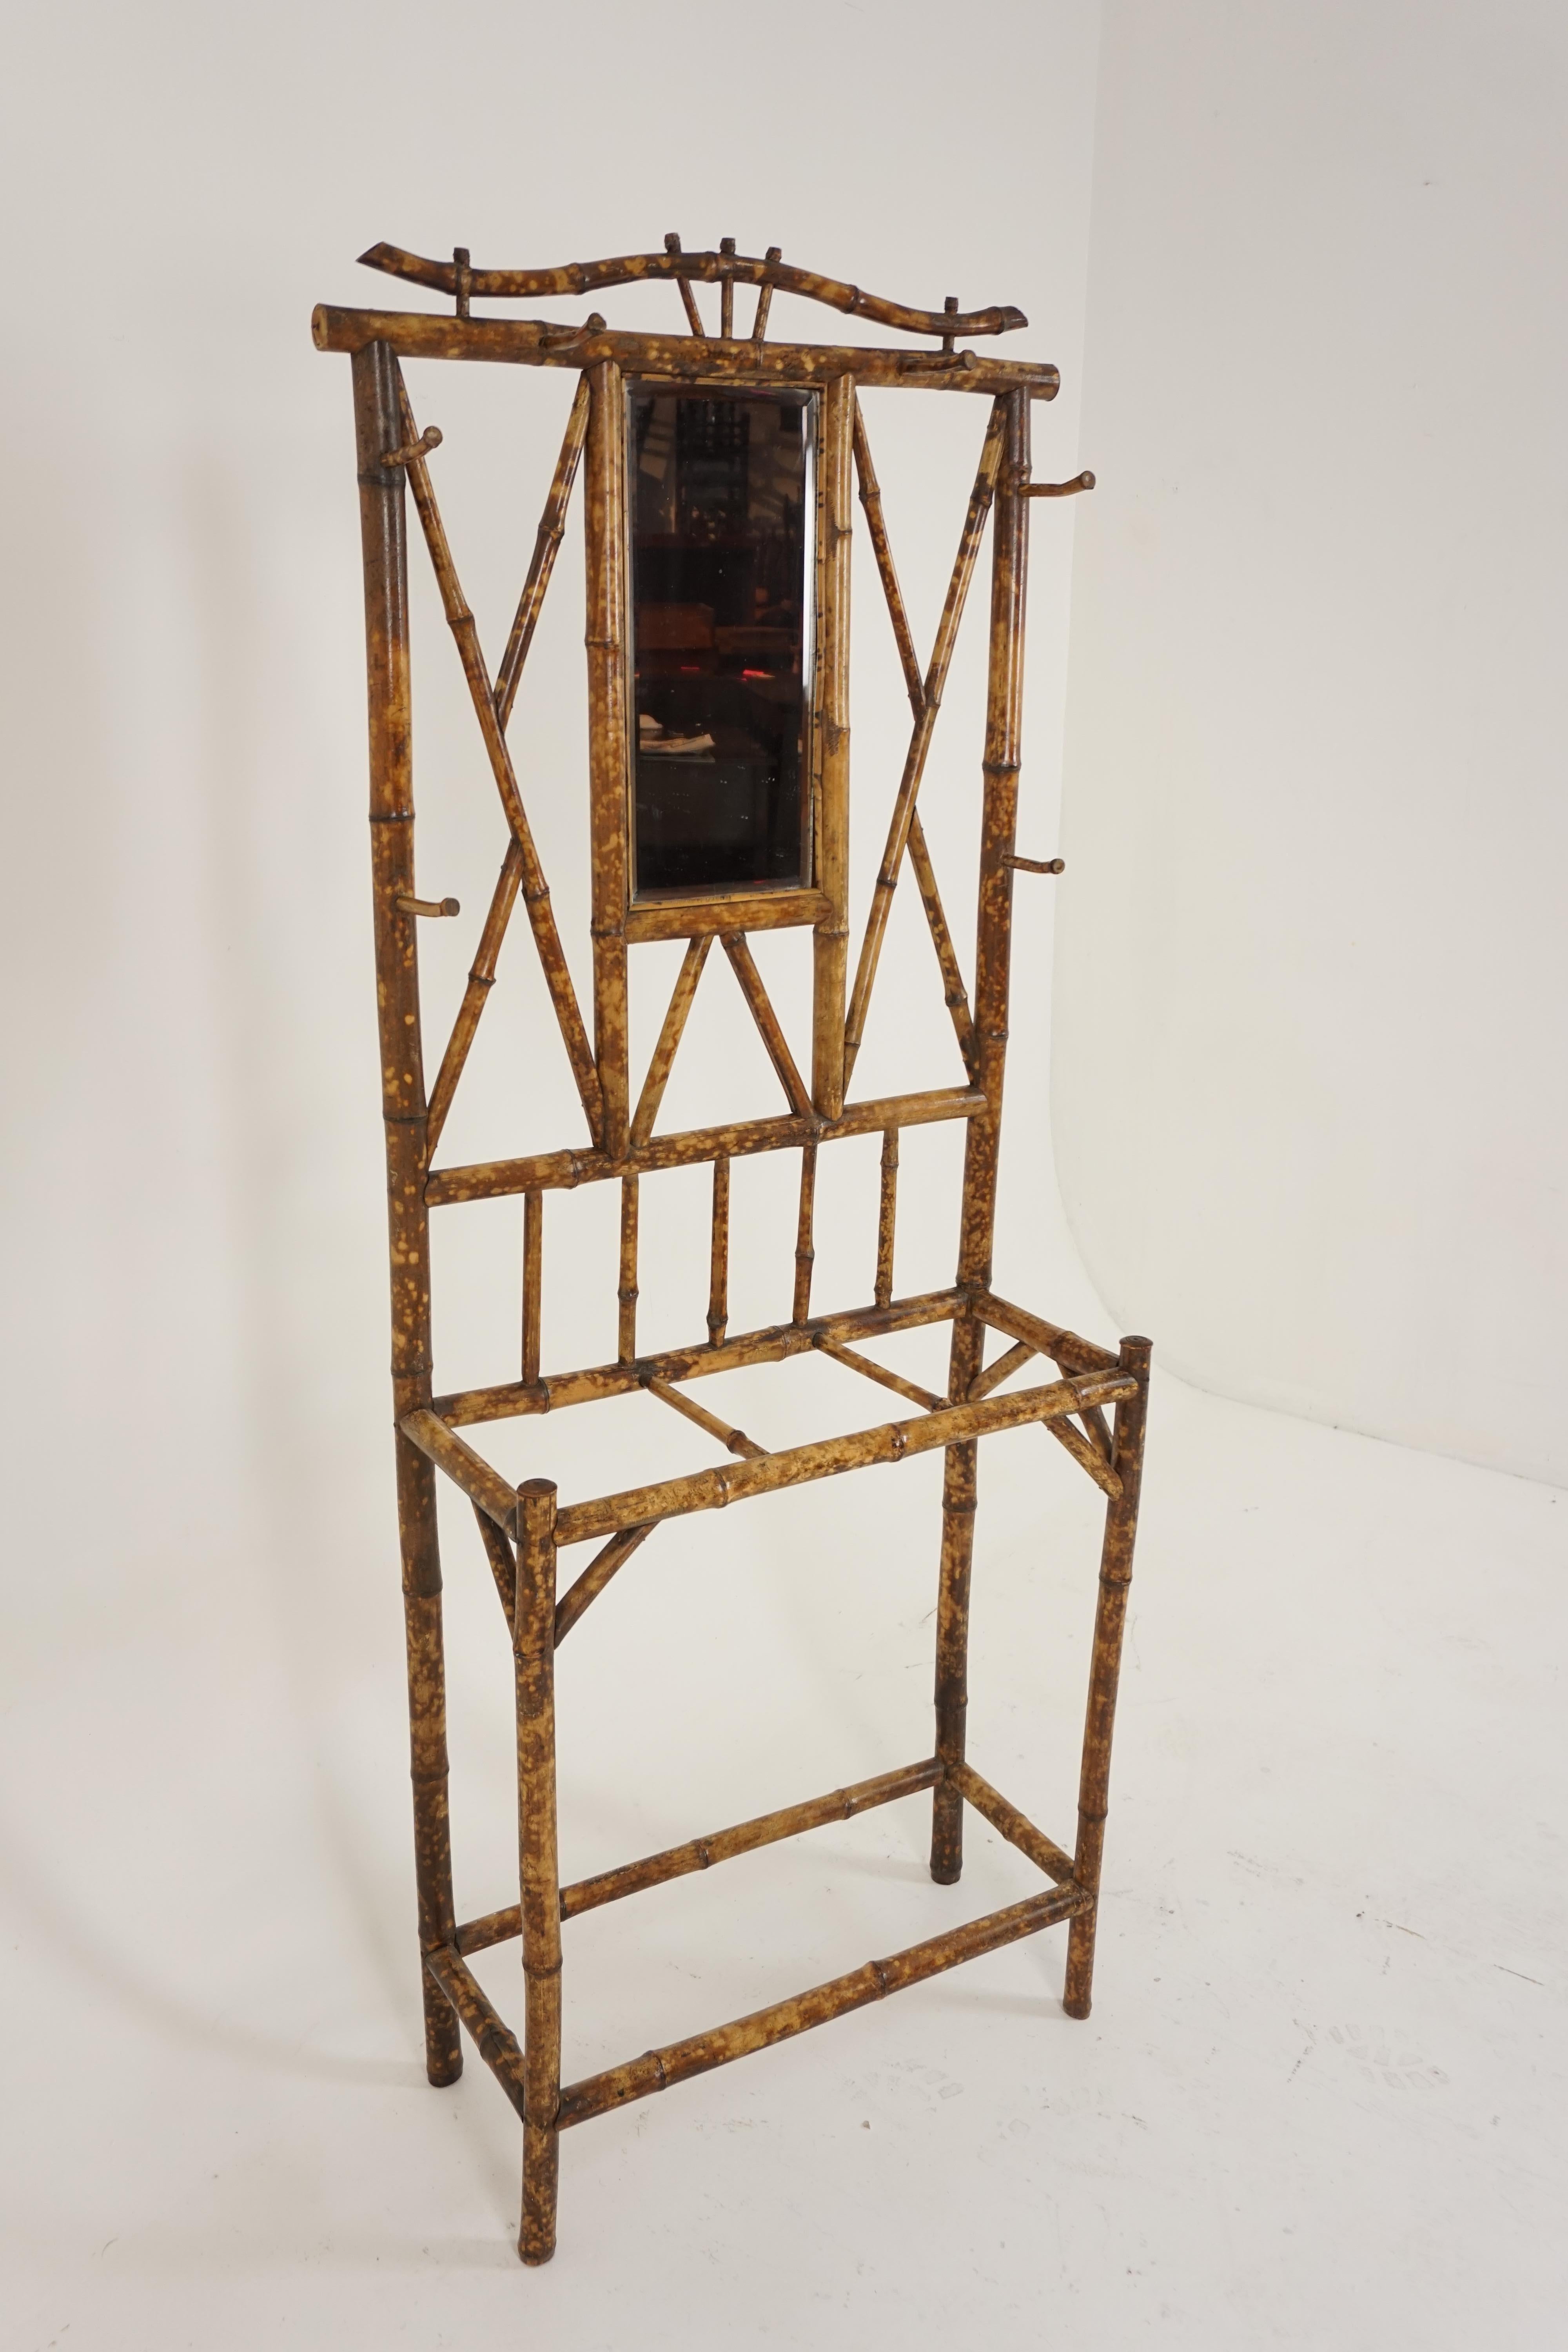 Antique Victorian aesthetic bamboo hall stand, Scotland, 1880

Scotland, 1880
Bamboo construction
Original finish
Beveled mirror to the top
Six bamboo hanging hooks
Three dividers fitted for walking sticks and umbrellas
Standing on four